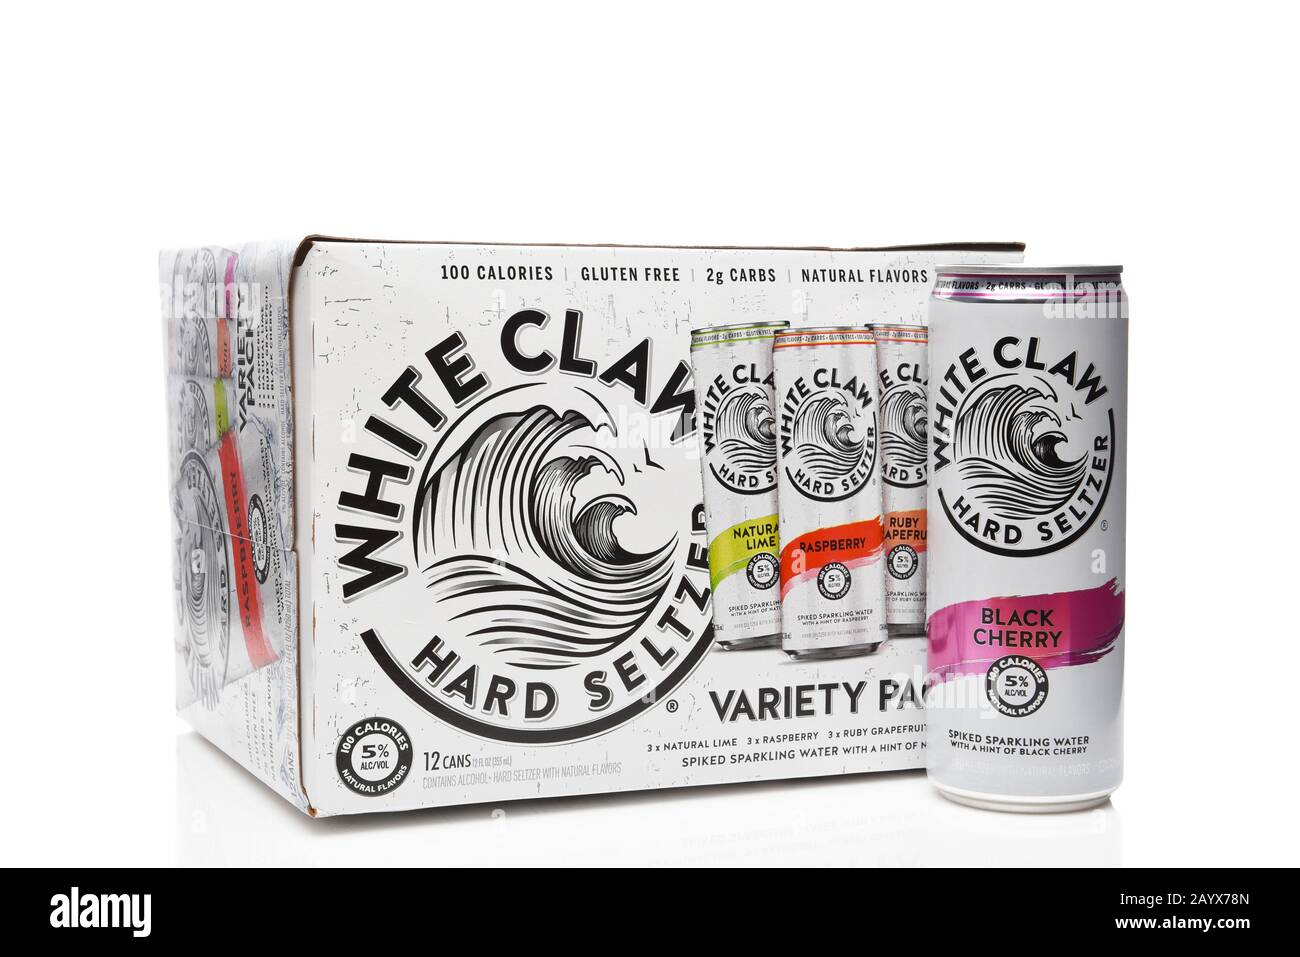 IRVINE, CALIFORNIA - 03 DEC 2019: White Claw Hard Seltzer 12 pack with one can. Stock Photo